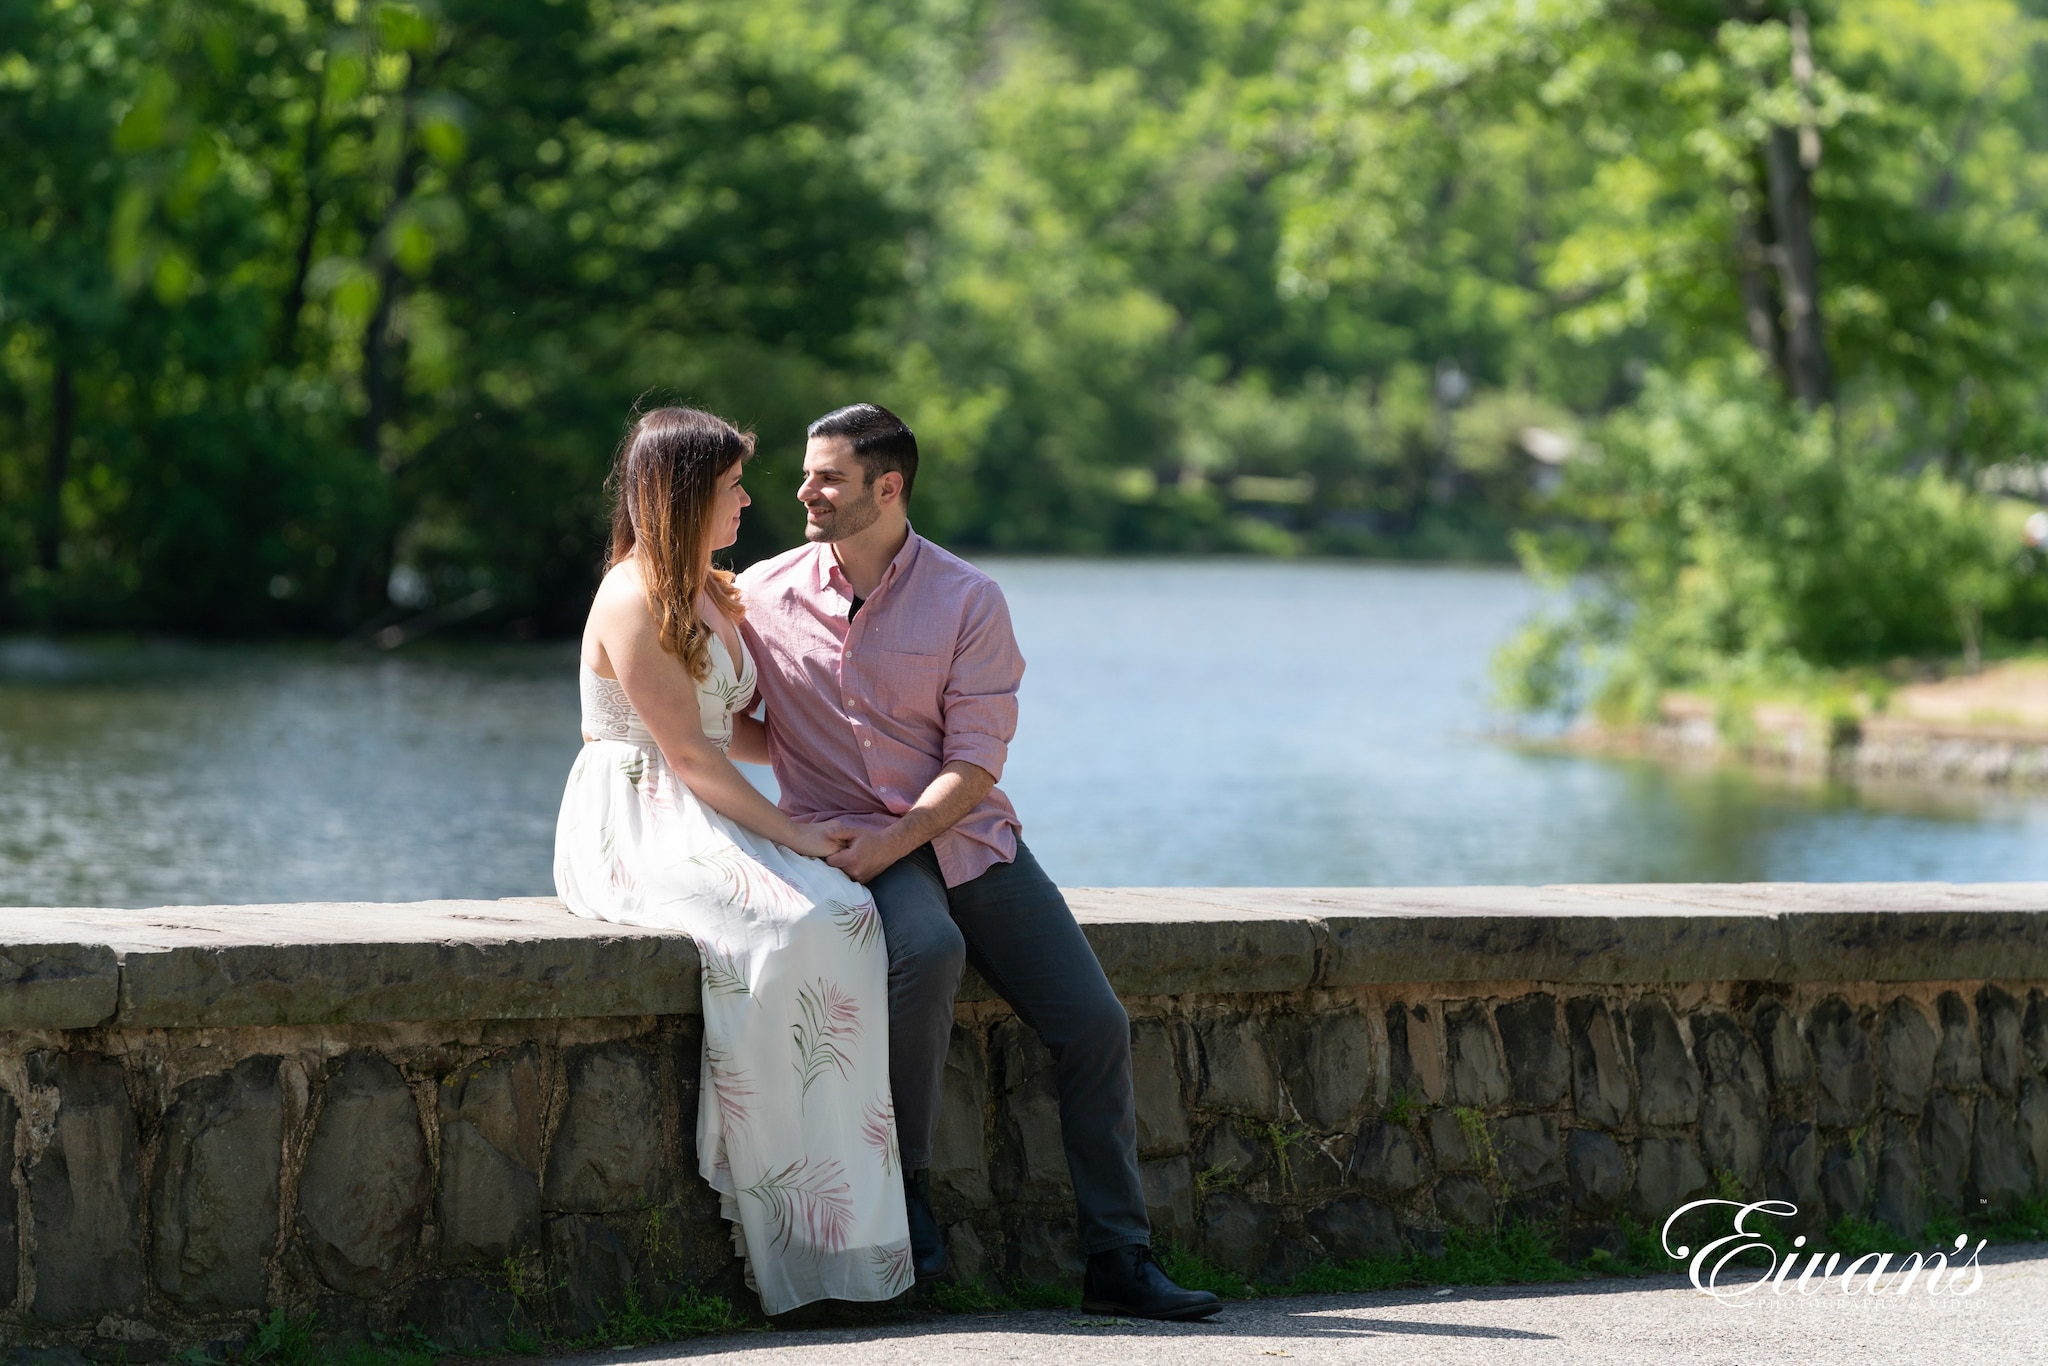 Engagement Photo Locations New Jersey 002